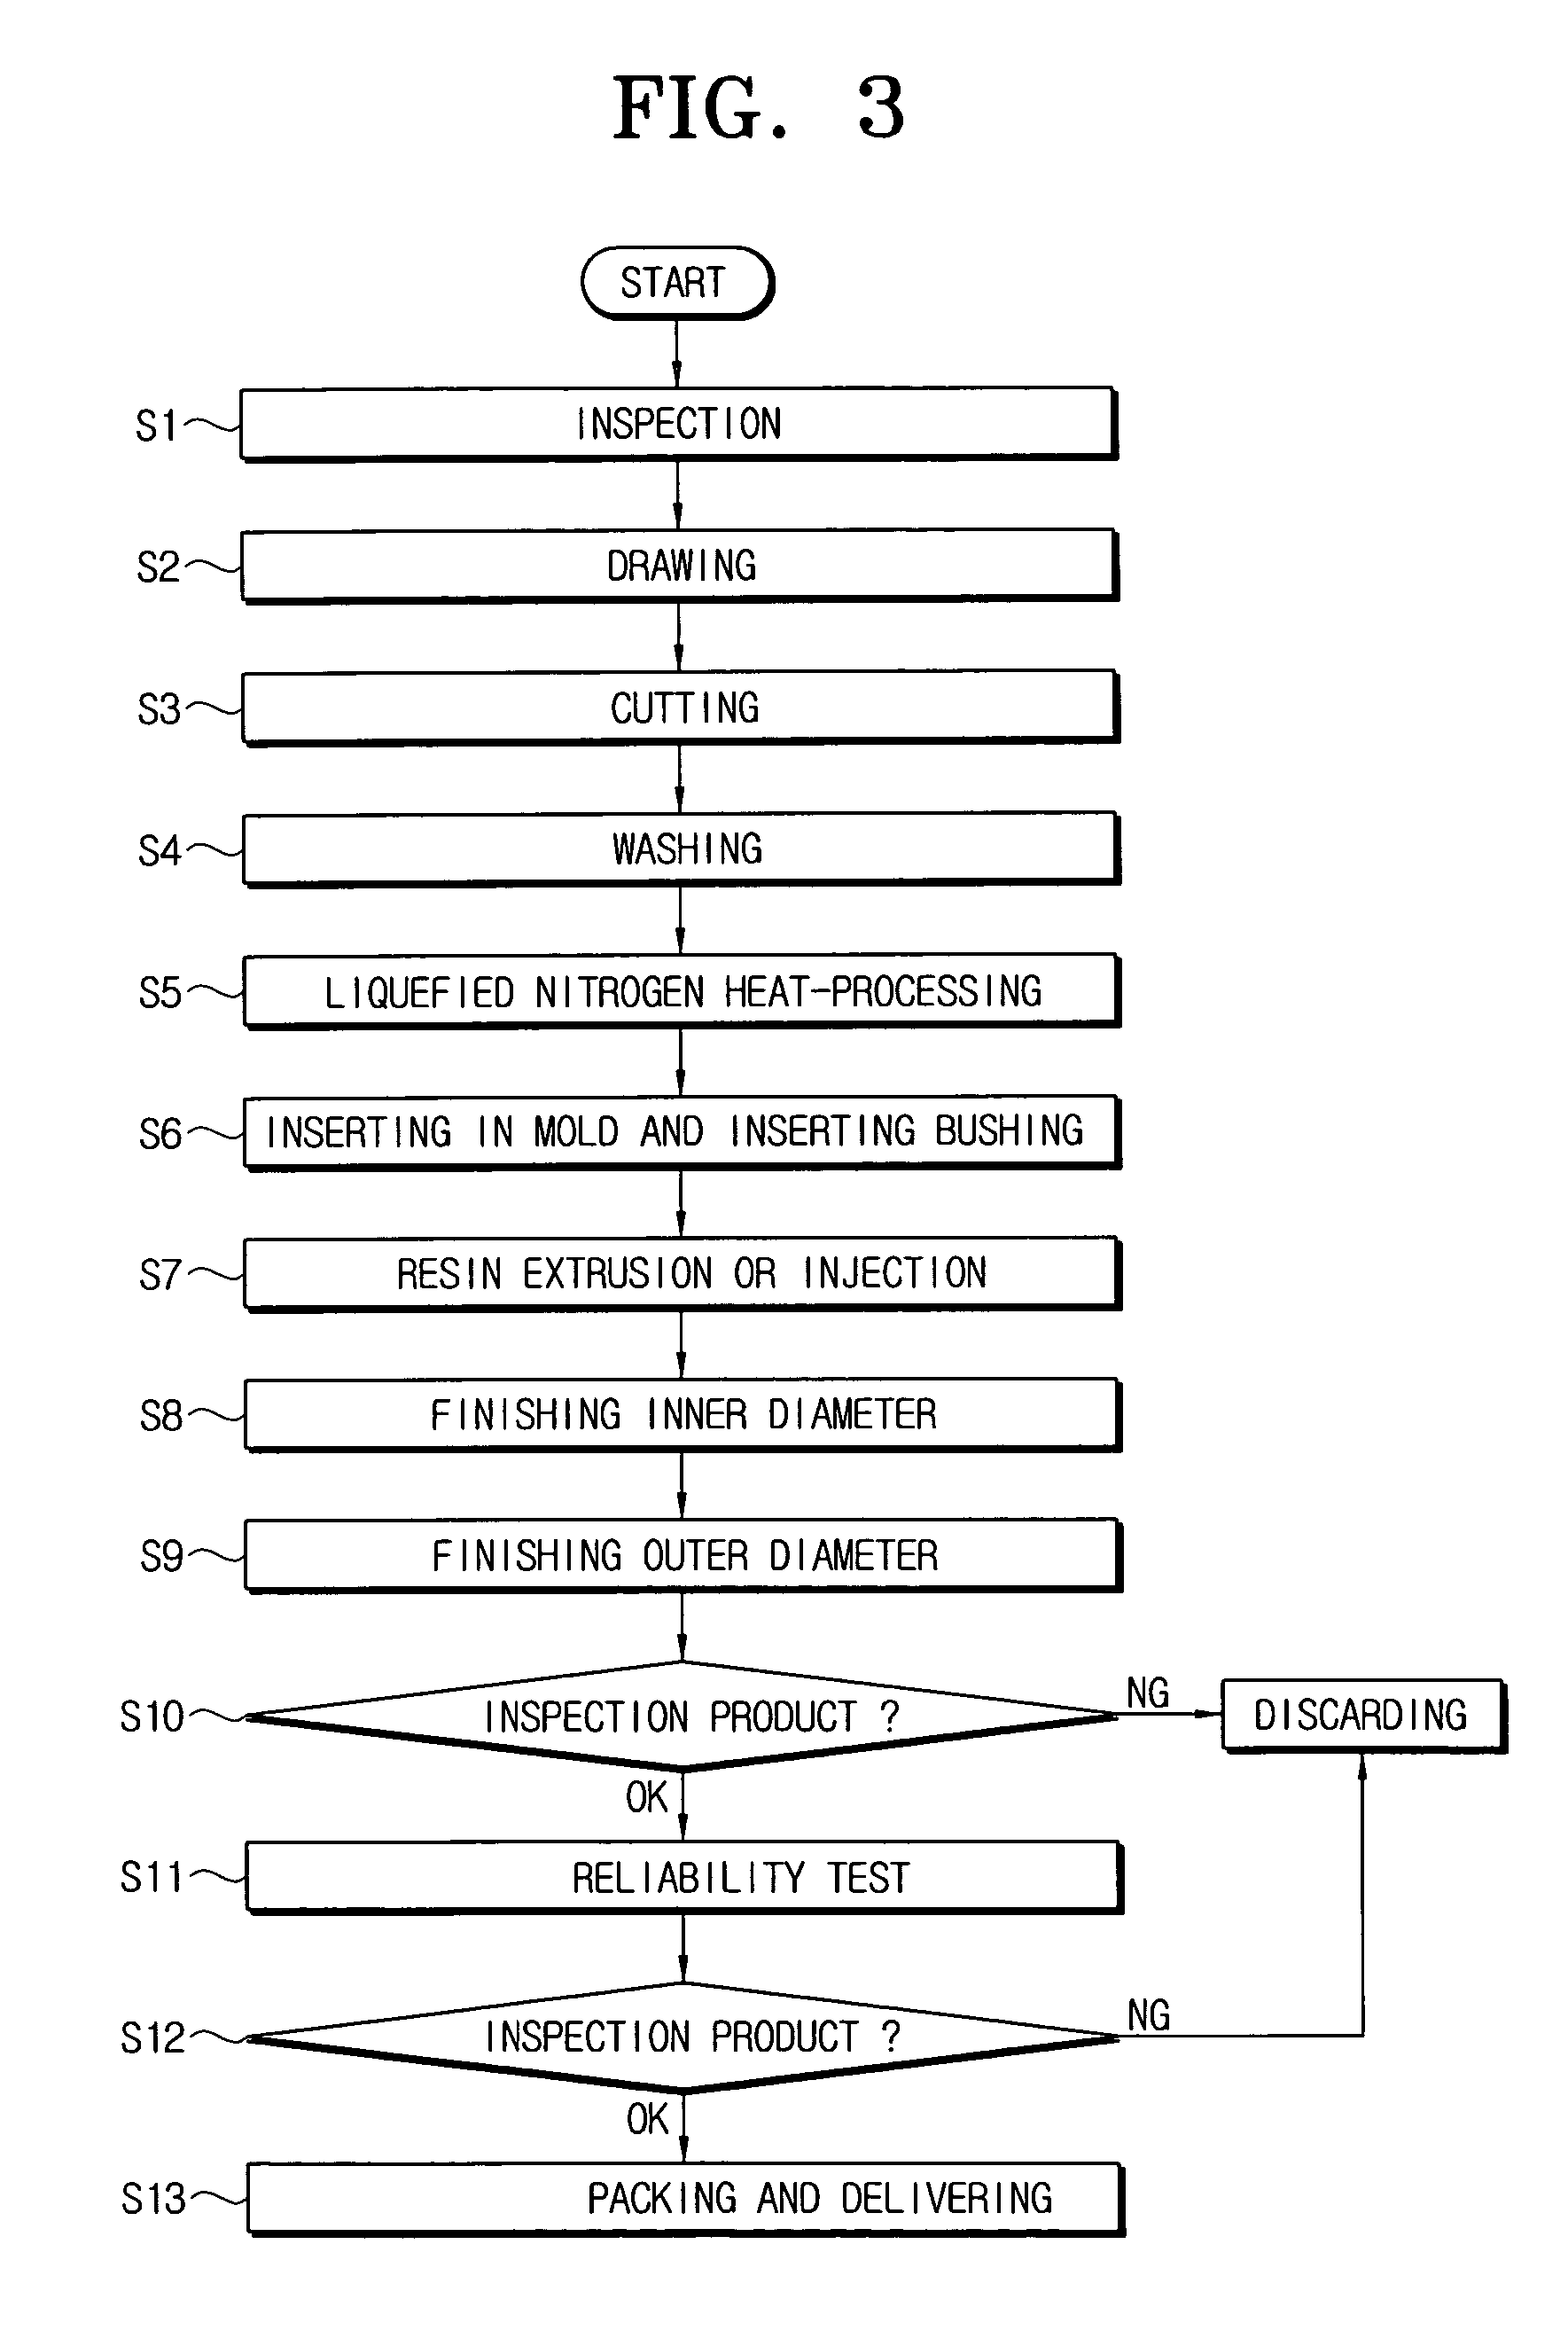 Method of fabricating a commutator for a motor